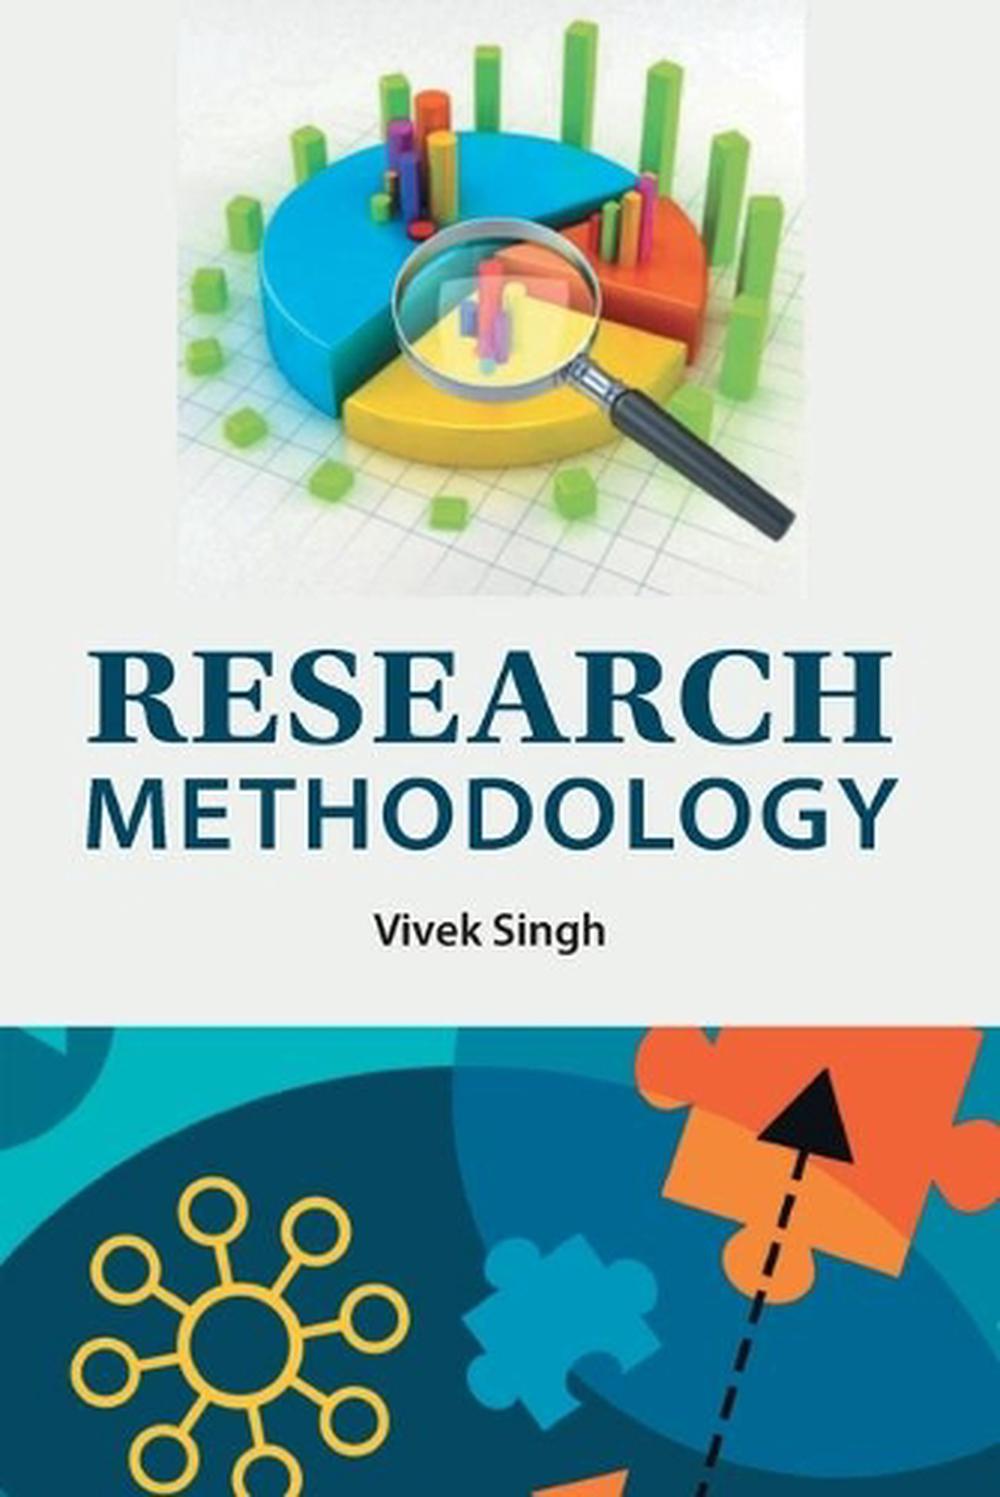 method of research book